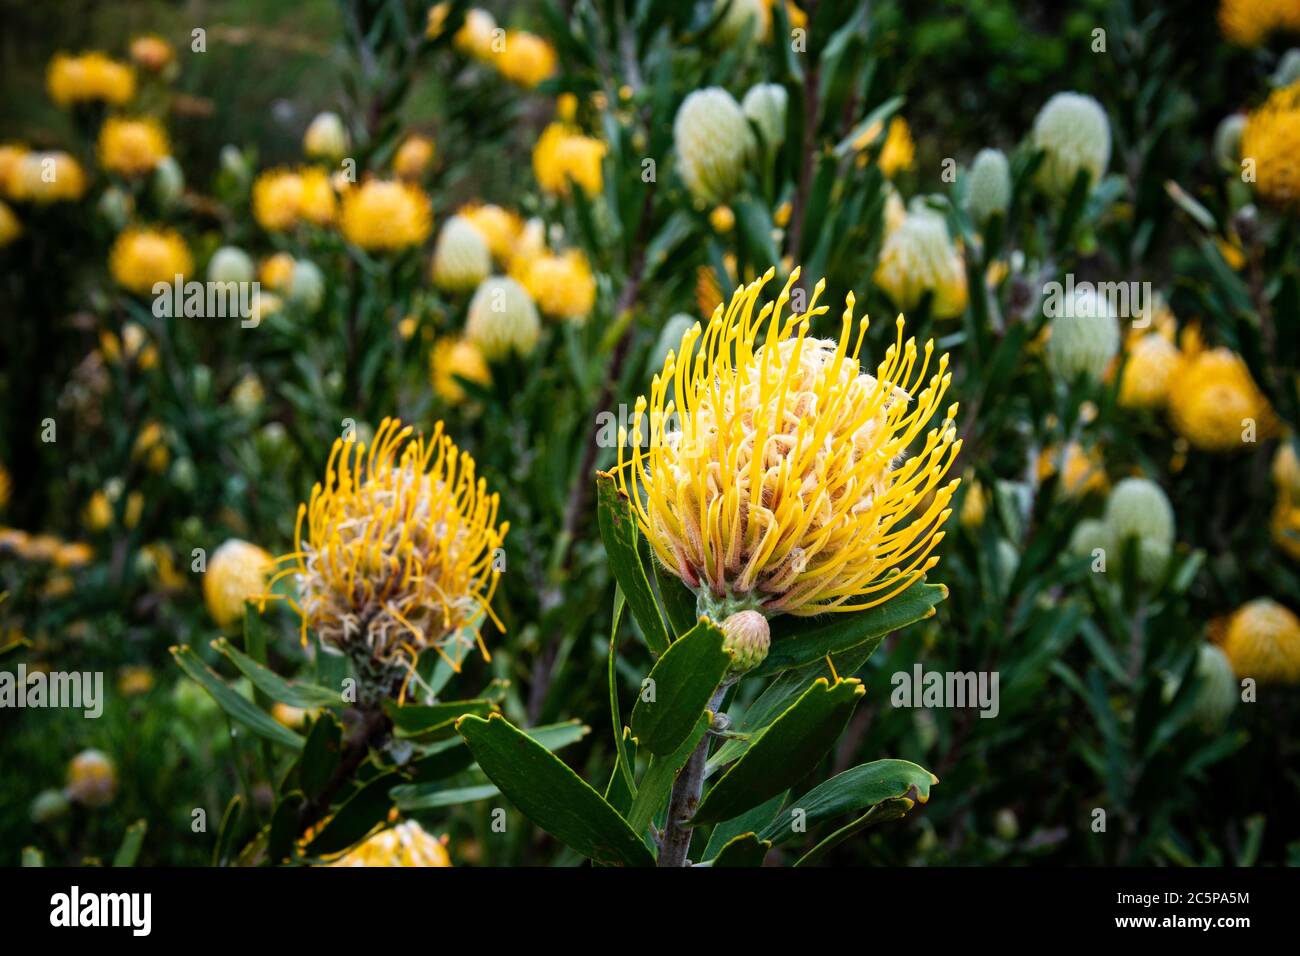 A display of Pincushion Proteas in Cape Town Botanical Gardens, South Africa Stock Photo